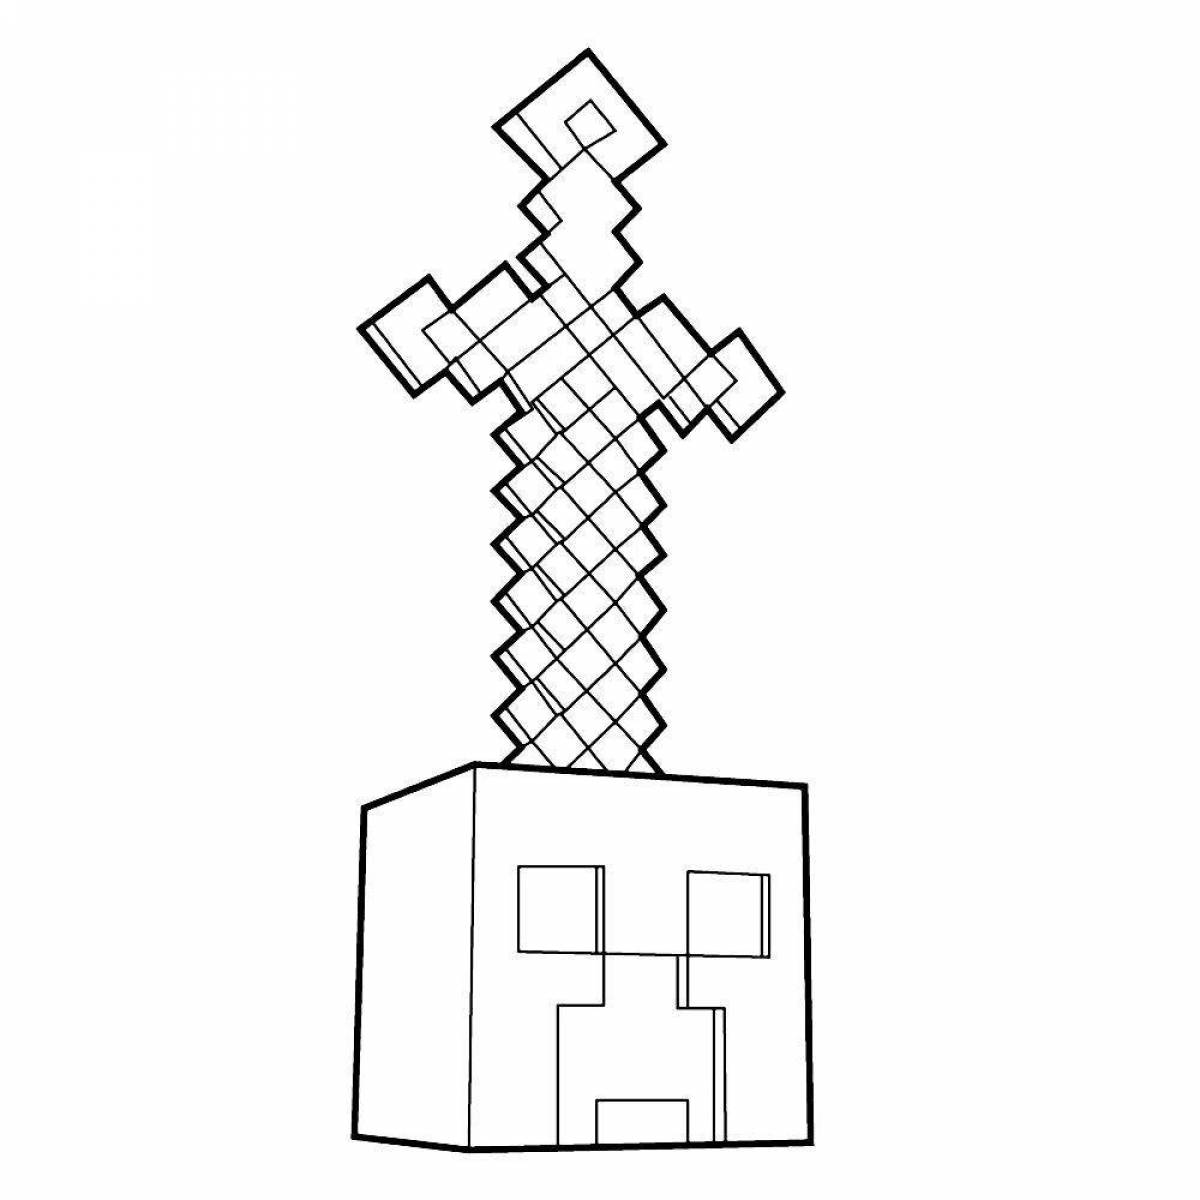 Awesome minecraft diamond sword coloring page